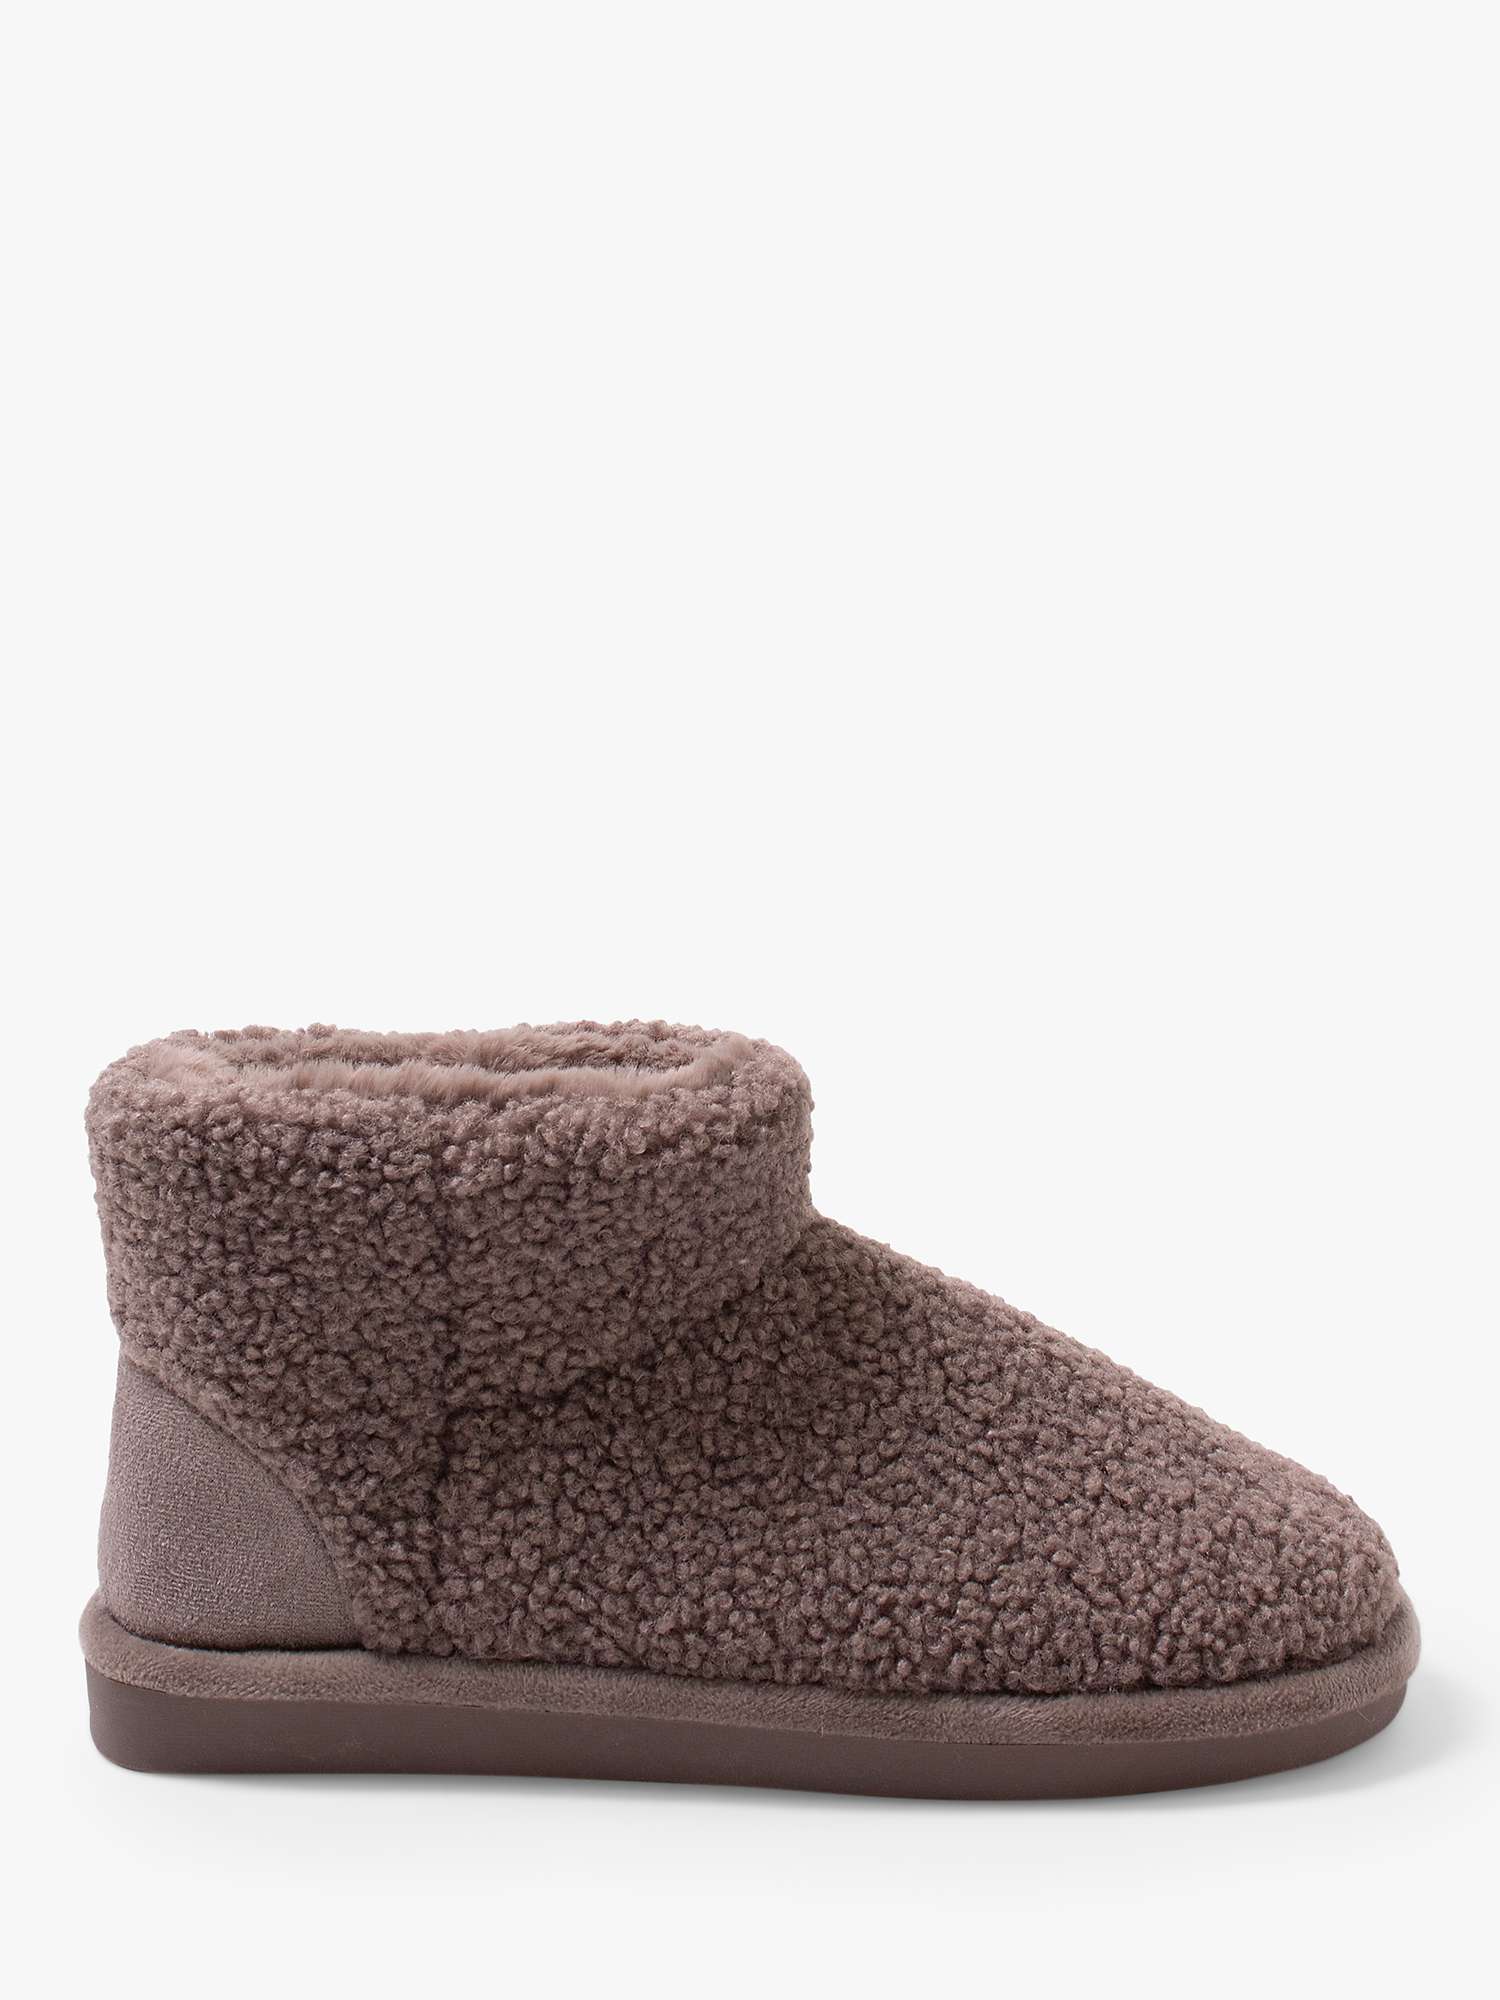 Buy Pretty You London Georgie Slipper Boots Online at johnlewis.com